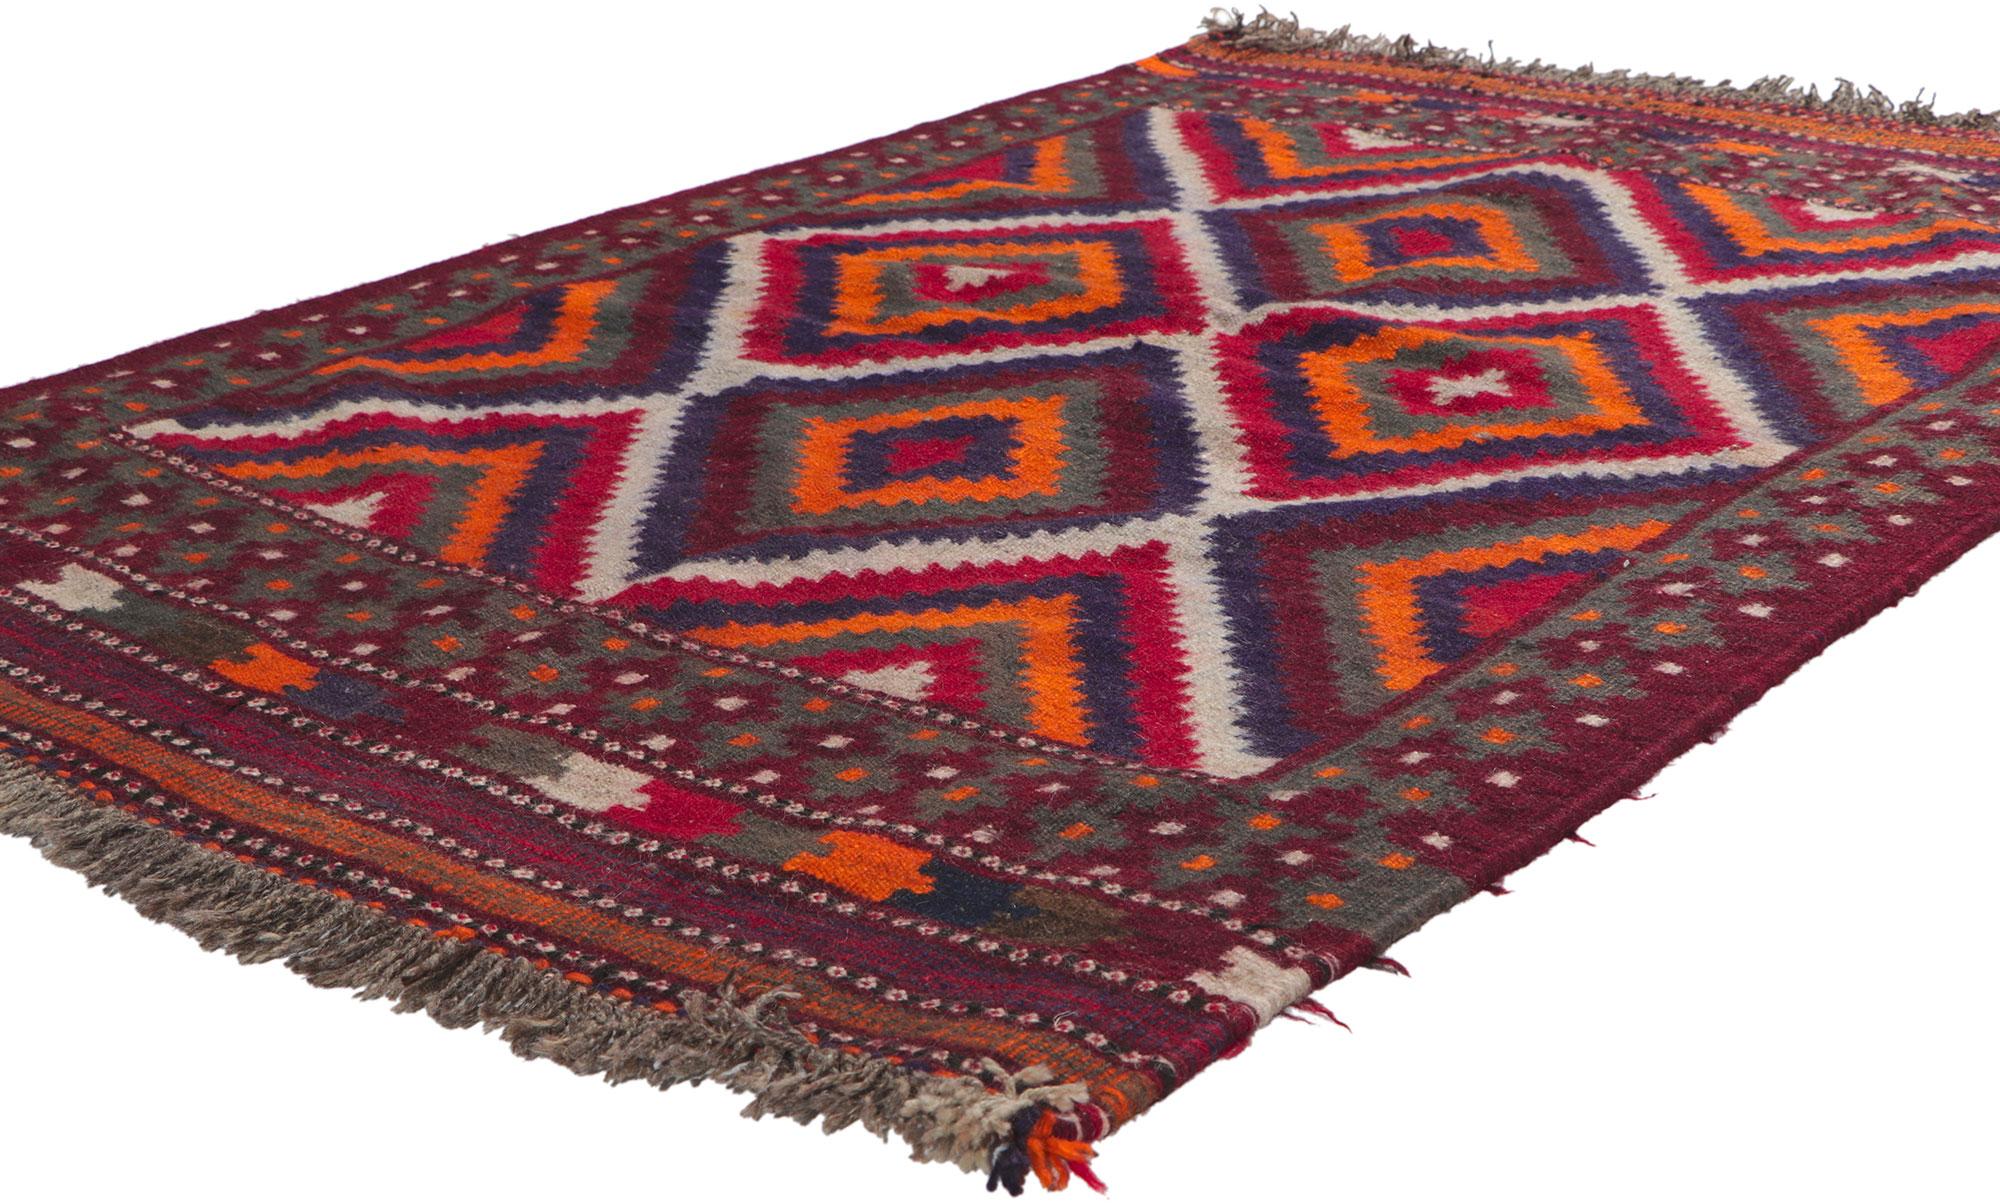 61094 Vintage Persian Shiraz Kilim rug with Tribal Style 03'08 x 05'07. Full of tiny details and tribal style, this hand-woven wool vintage Persian Shiraz kilim rug is a captivating vision of woven beauty. The abrashed field features an all-over